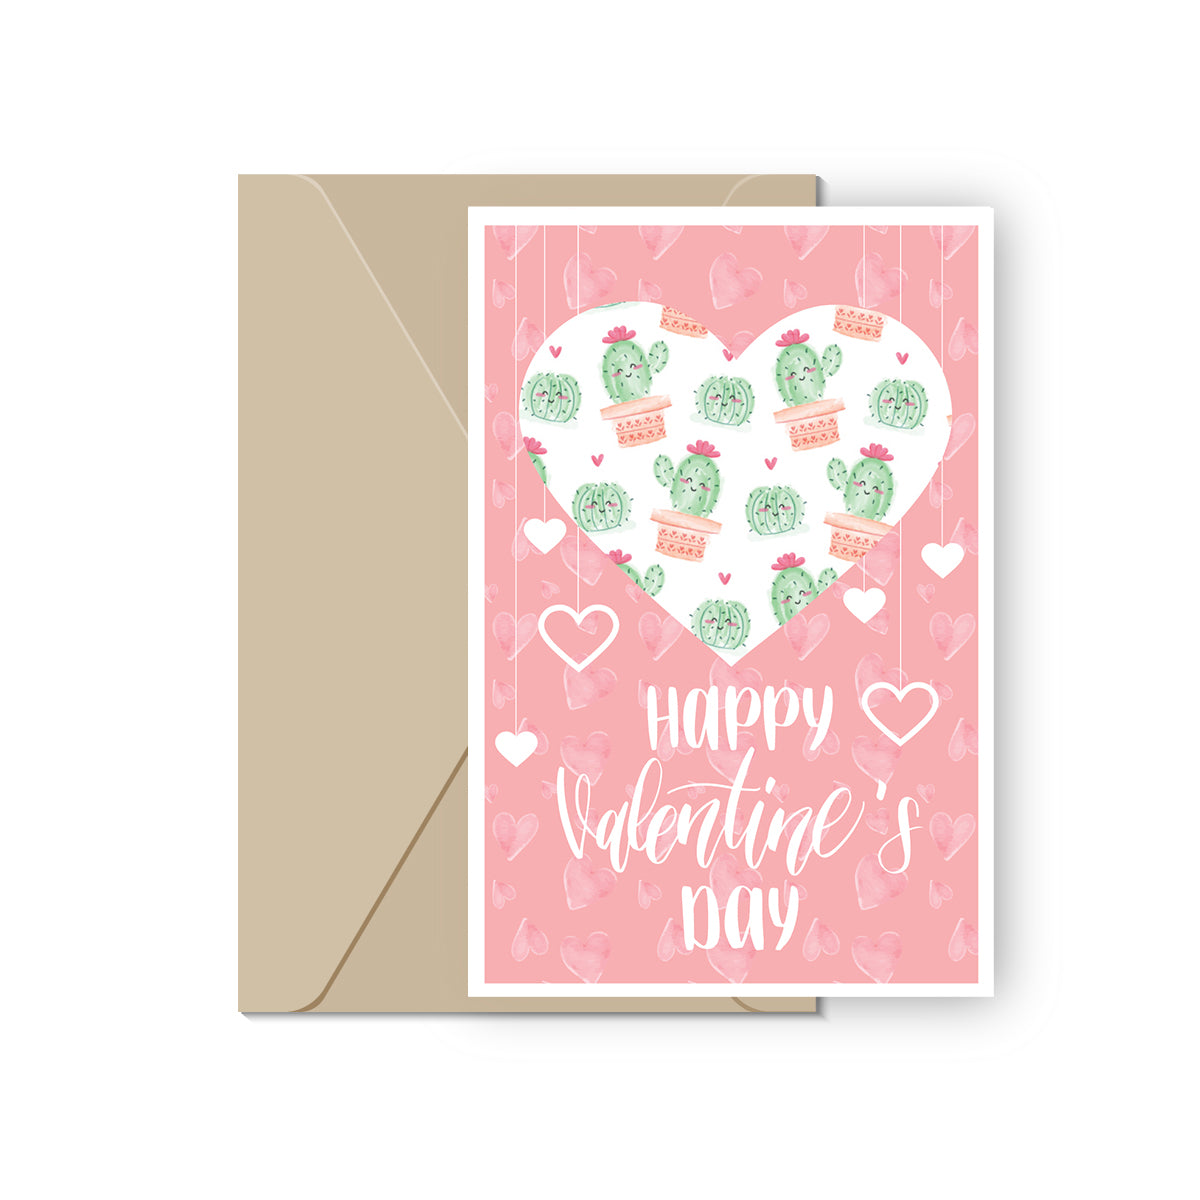 Hallmark Valentines Day Cards Assortment for Kids, Be Happy (8 Valentine's  Day Cards with Envelopes)